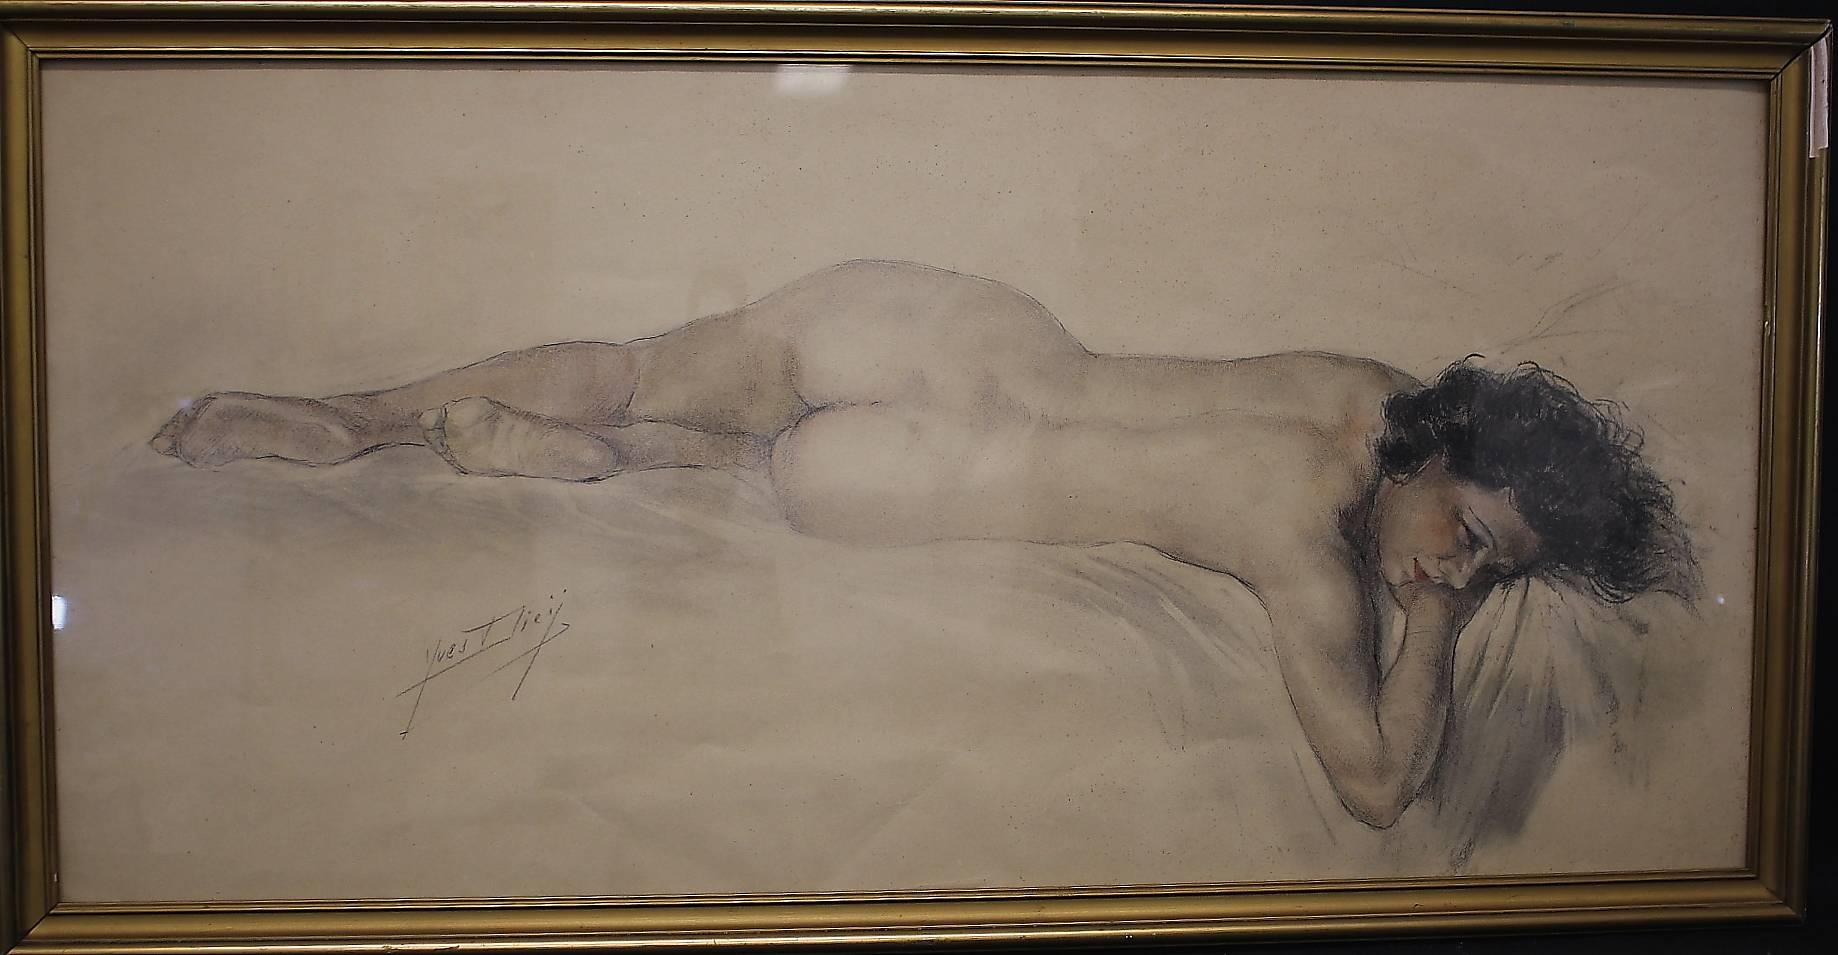 Pastel and pencil drawing on paper by French artist Yves Diey (1892-1984).
Signed. Framed. Drawing dimensions with out frame 29